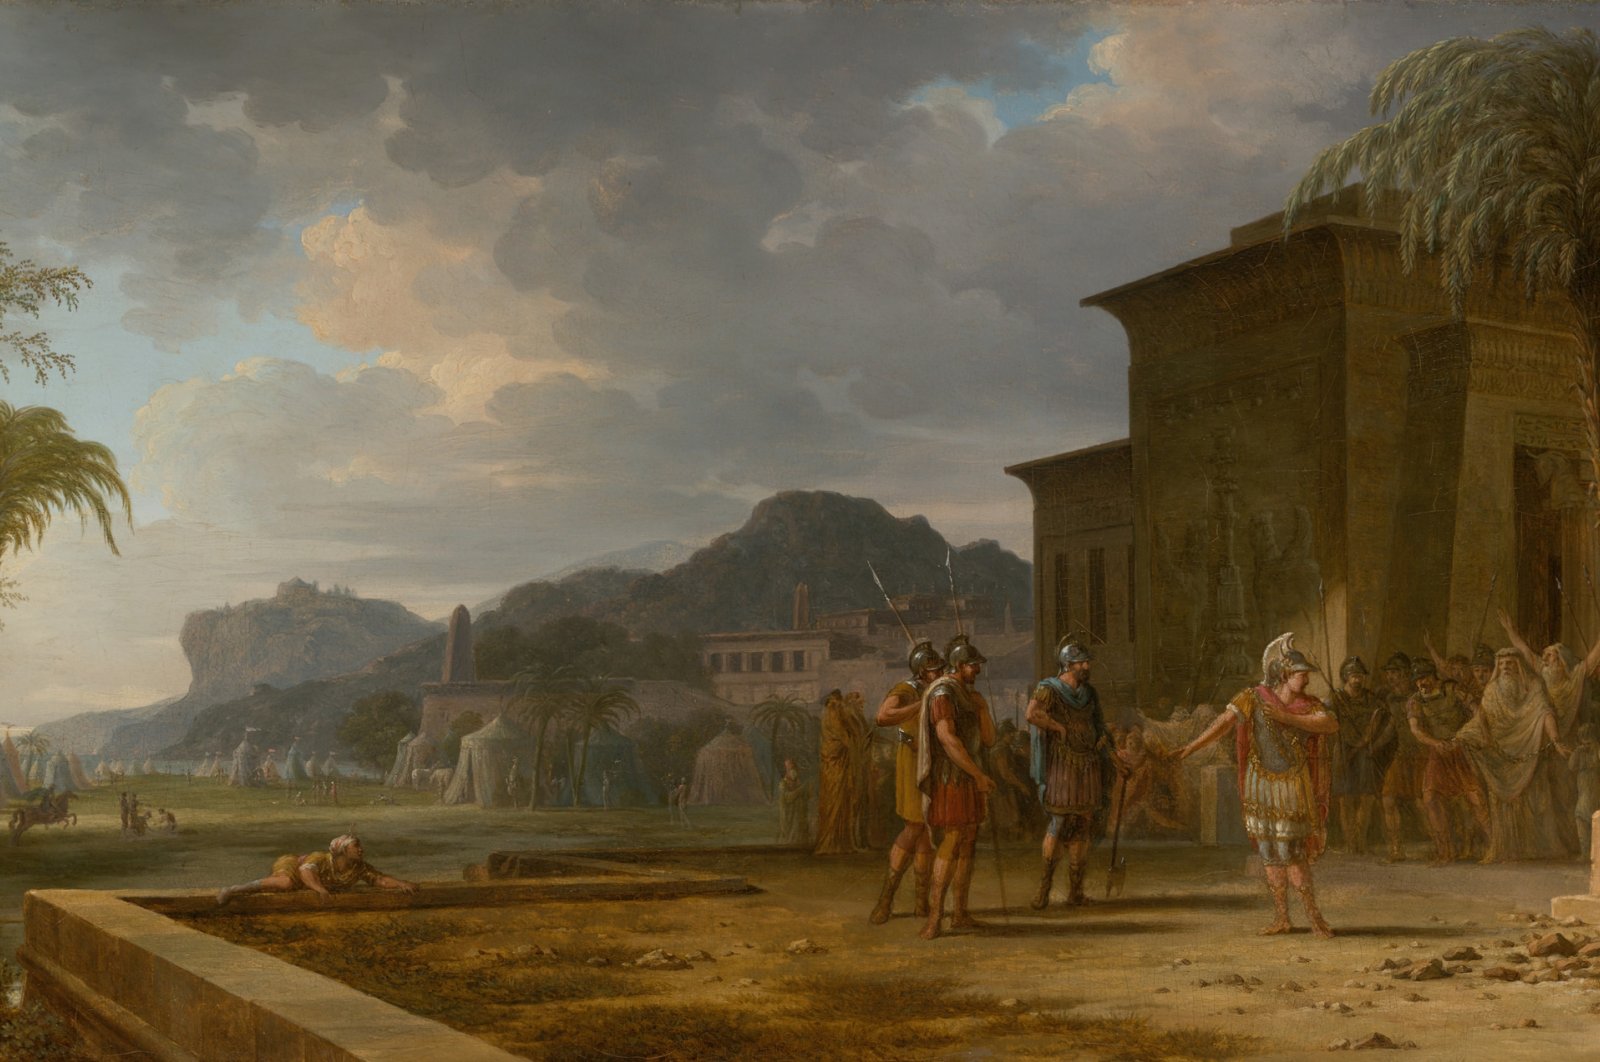 Alexander at the Tomb of Cyrus the Great, 1796 by Pierre Henri de Valenciennes. (Getty Images)